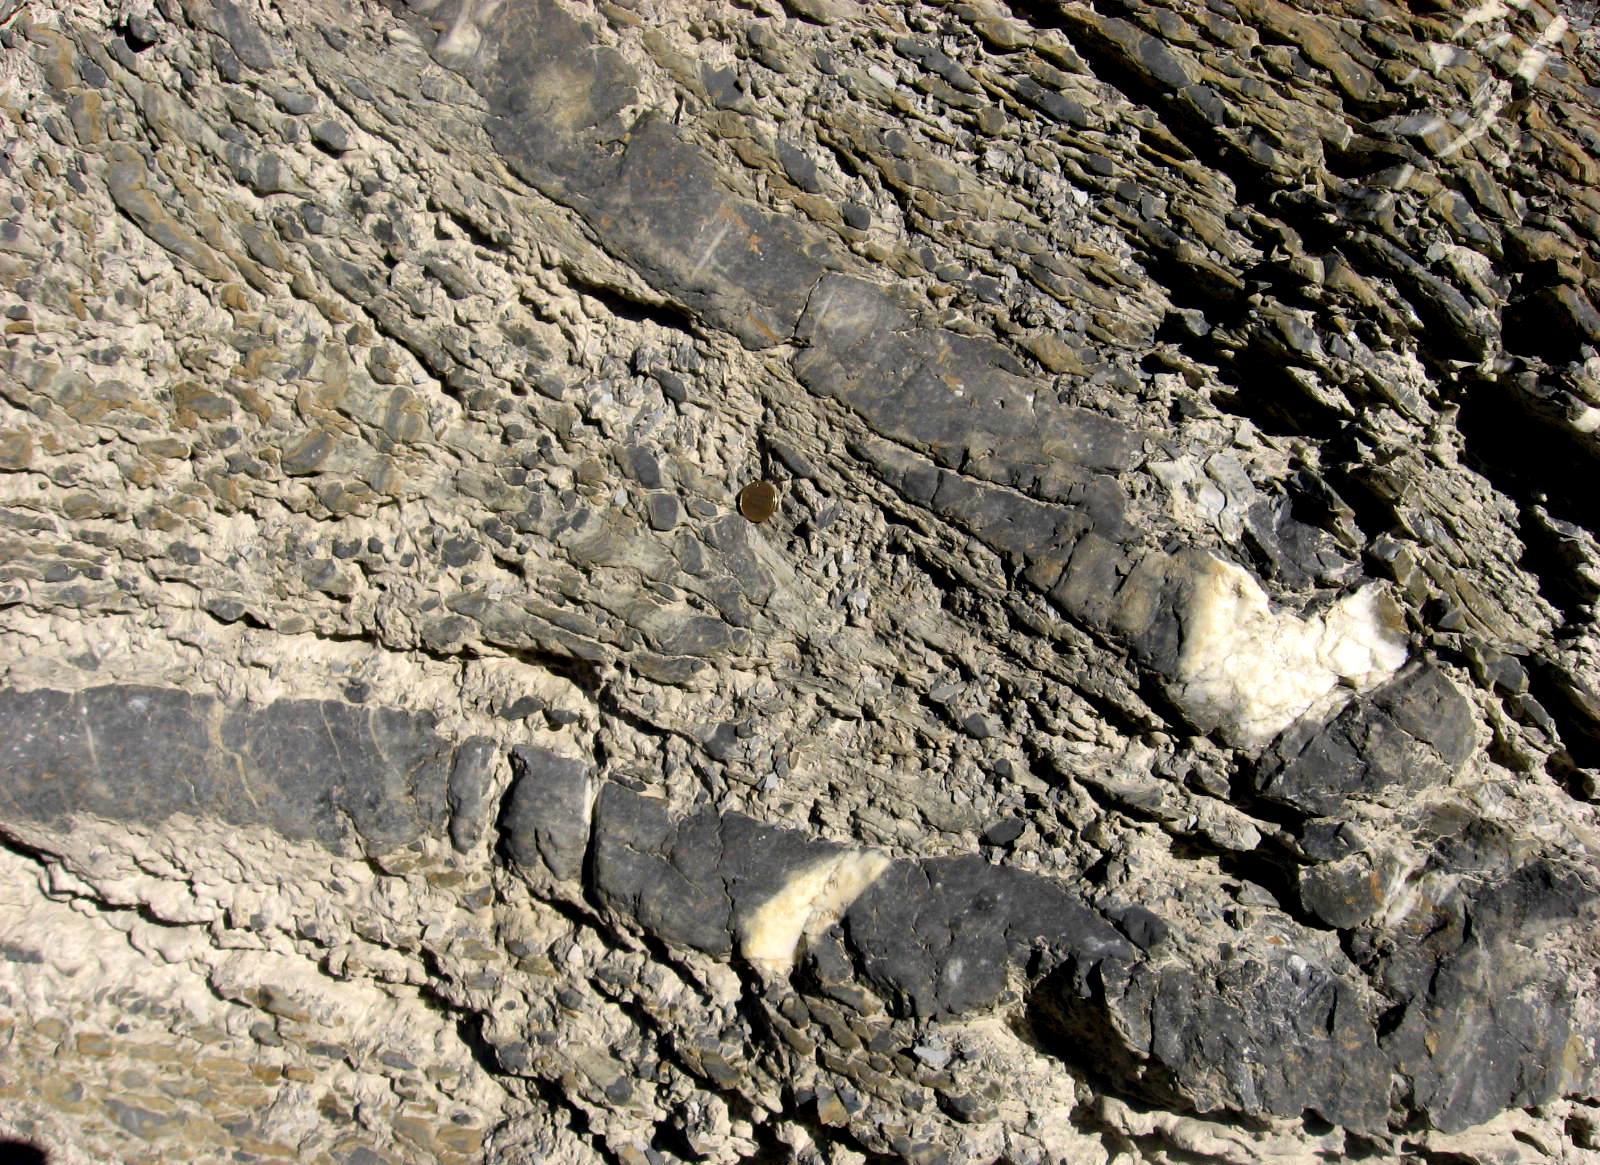 Figure 12.1 Folds in sedimentary rocks near to Golden and the Kickinghorse River, BC. [SE]